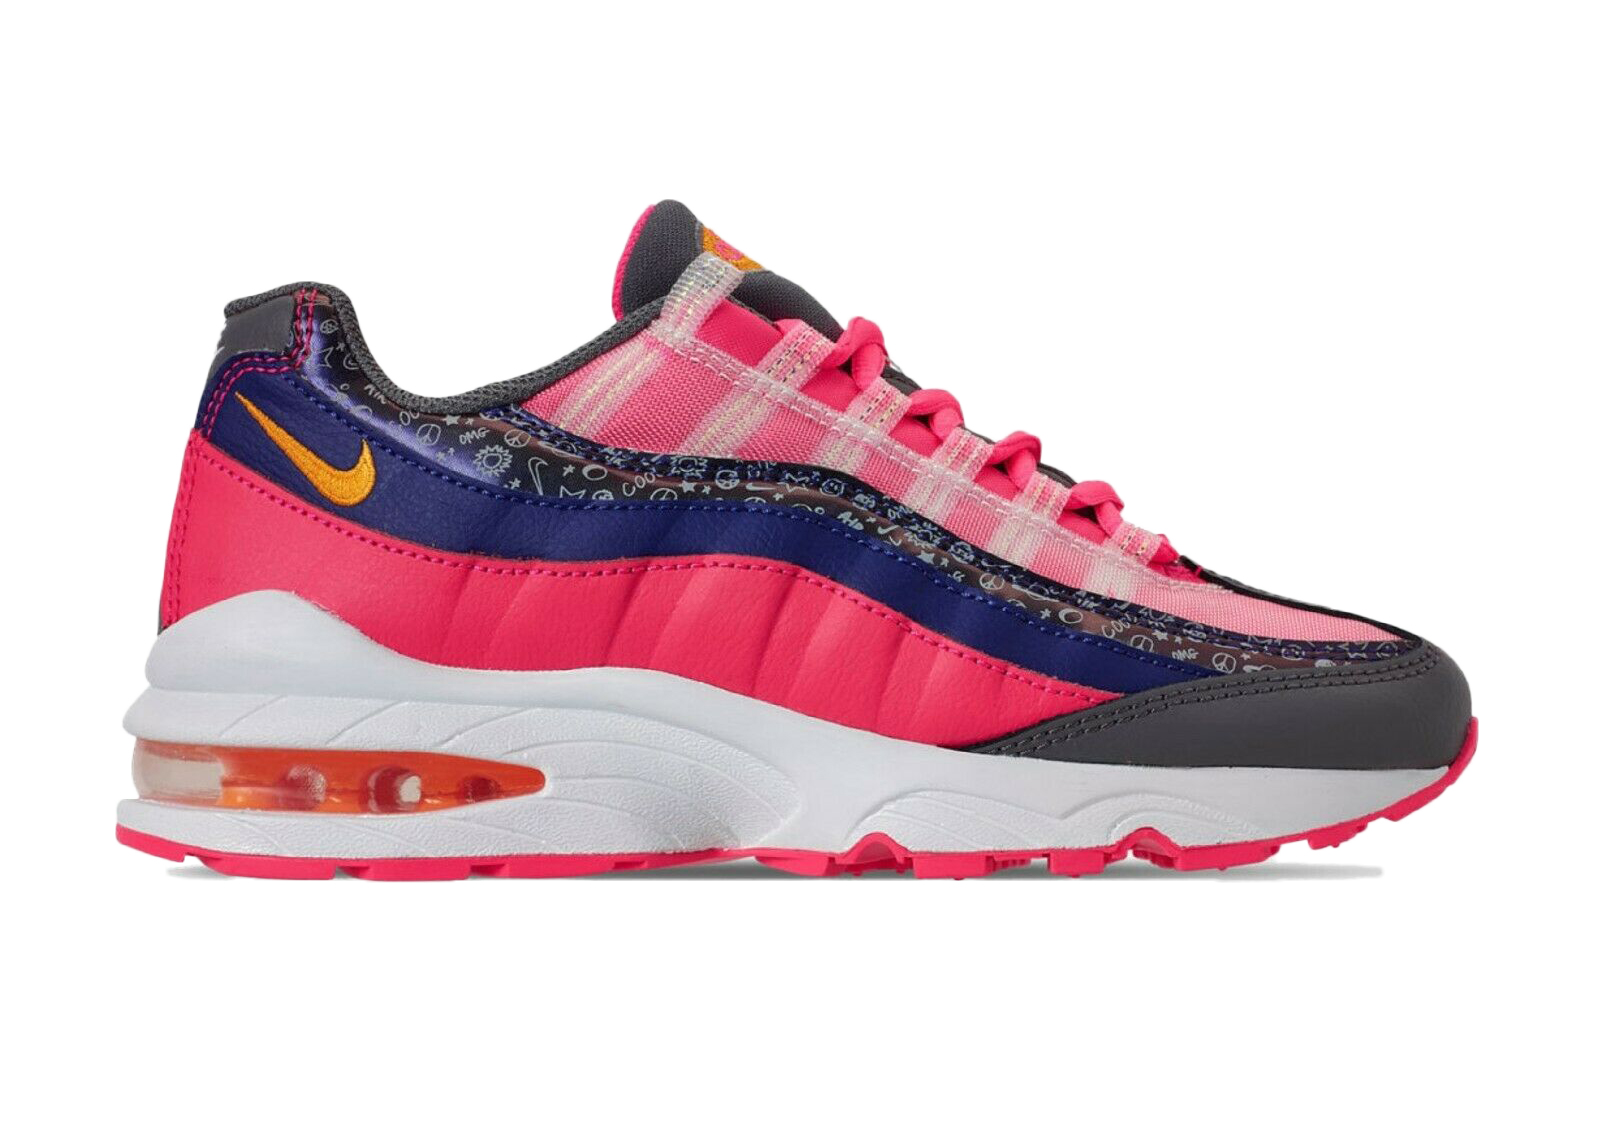 Nike Air Max 95 Purple Racer Pink (GS) キッズ - CI9933-500 - JP